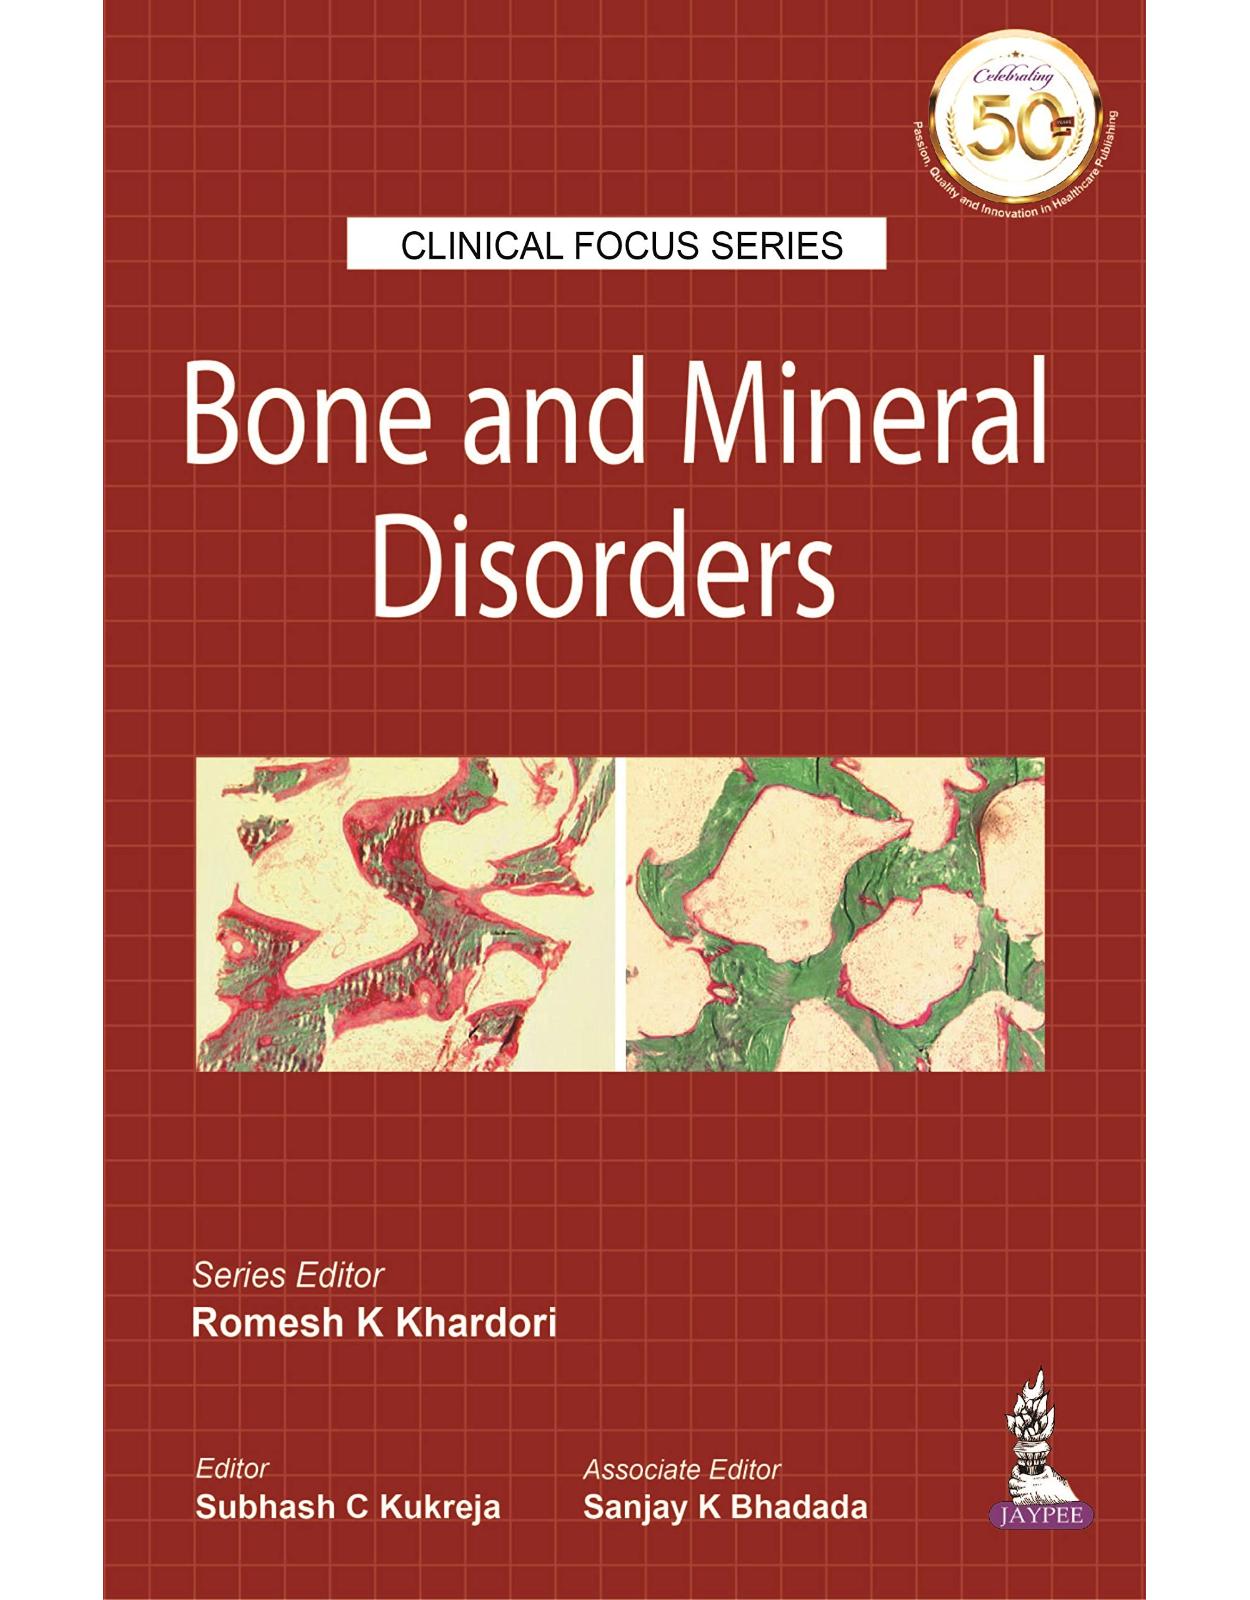 Clinical Focus Series: Bone and Mineral Disorders